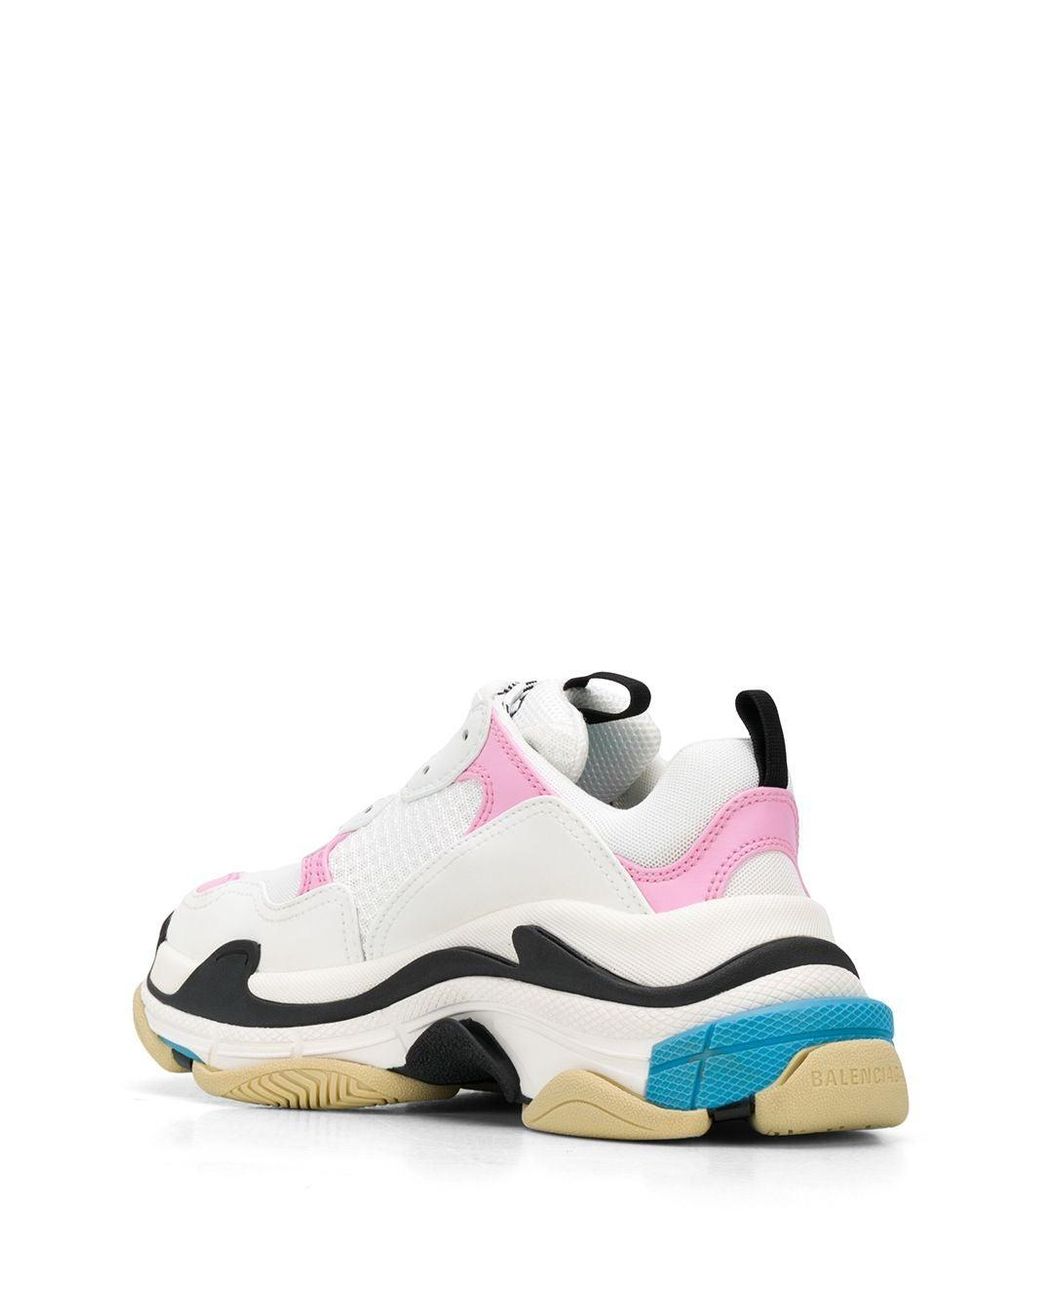 Balenciaga Triple S Sneakers in White (Pink) | Lyst